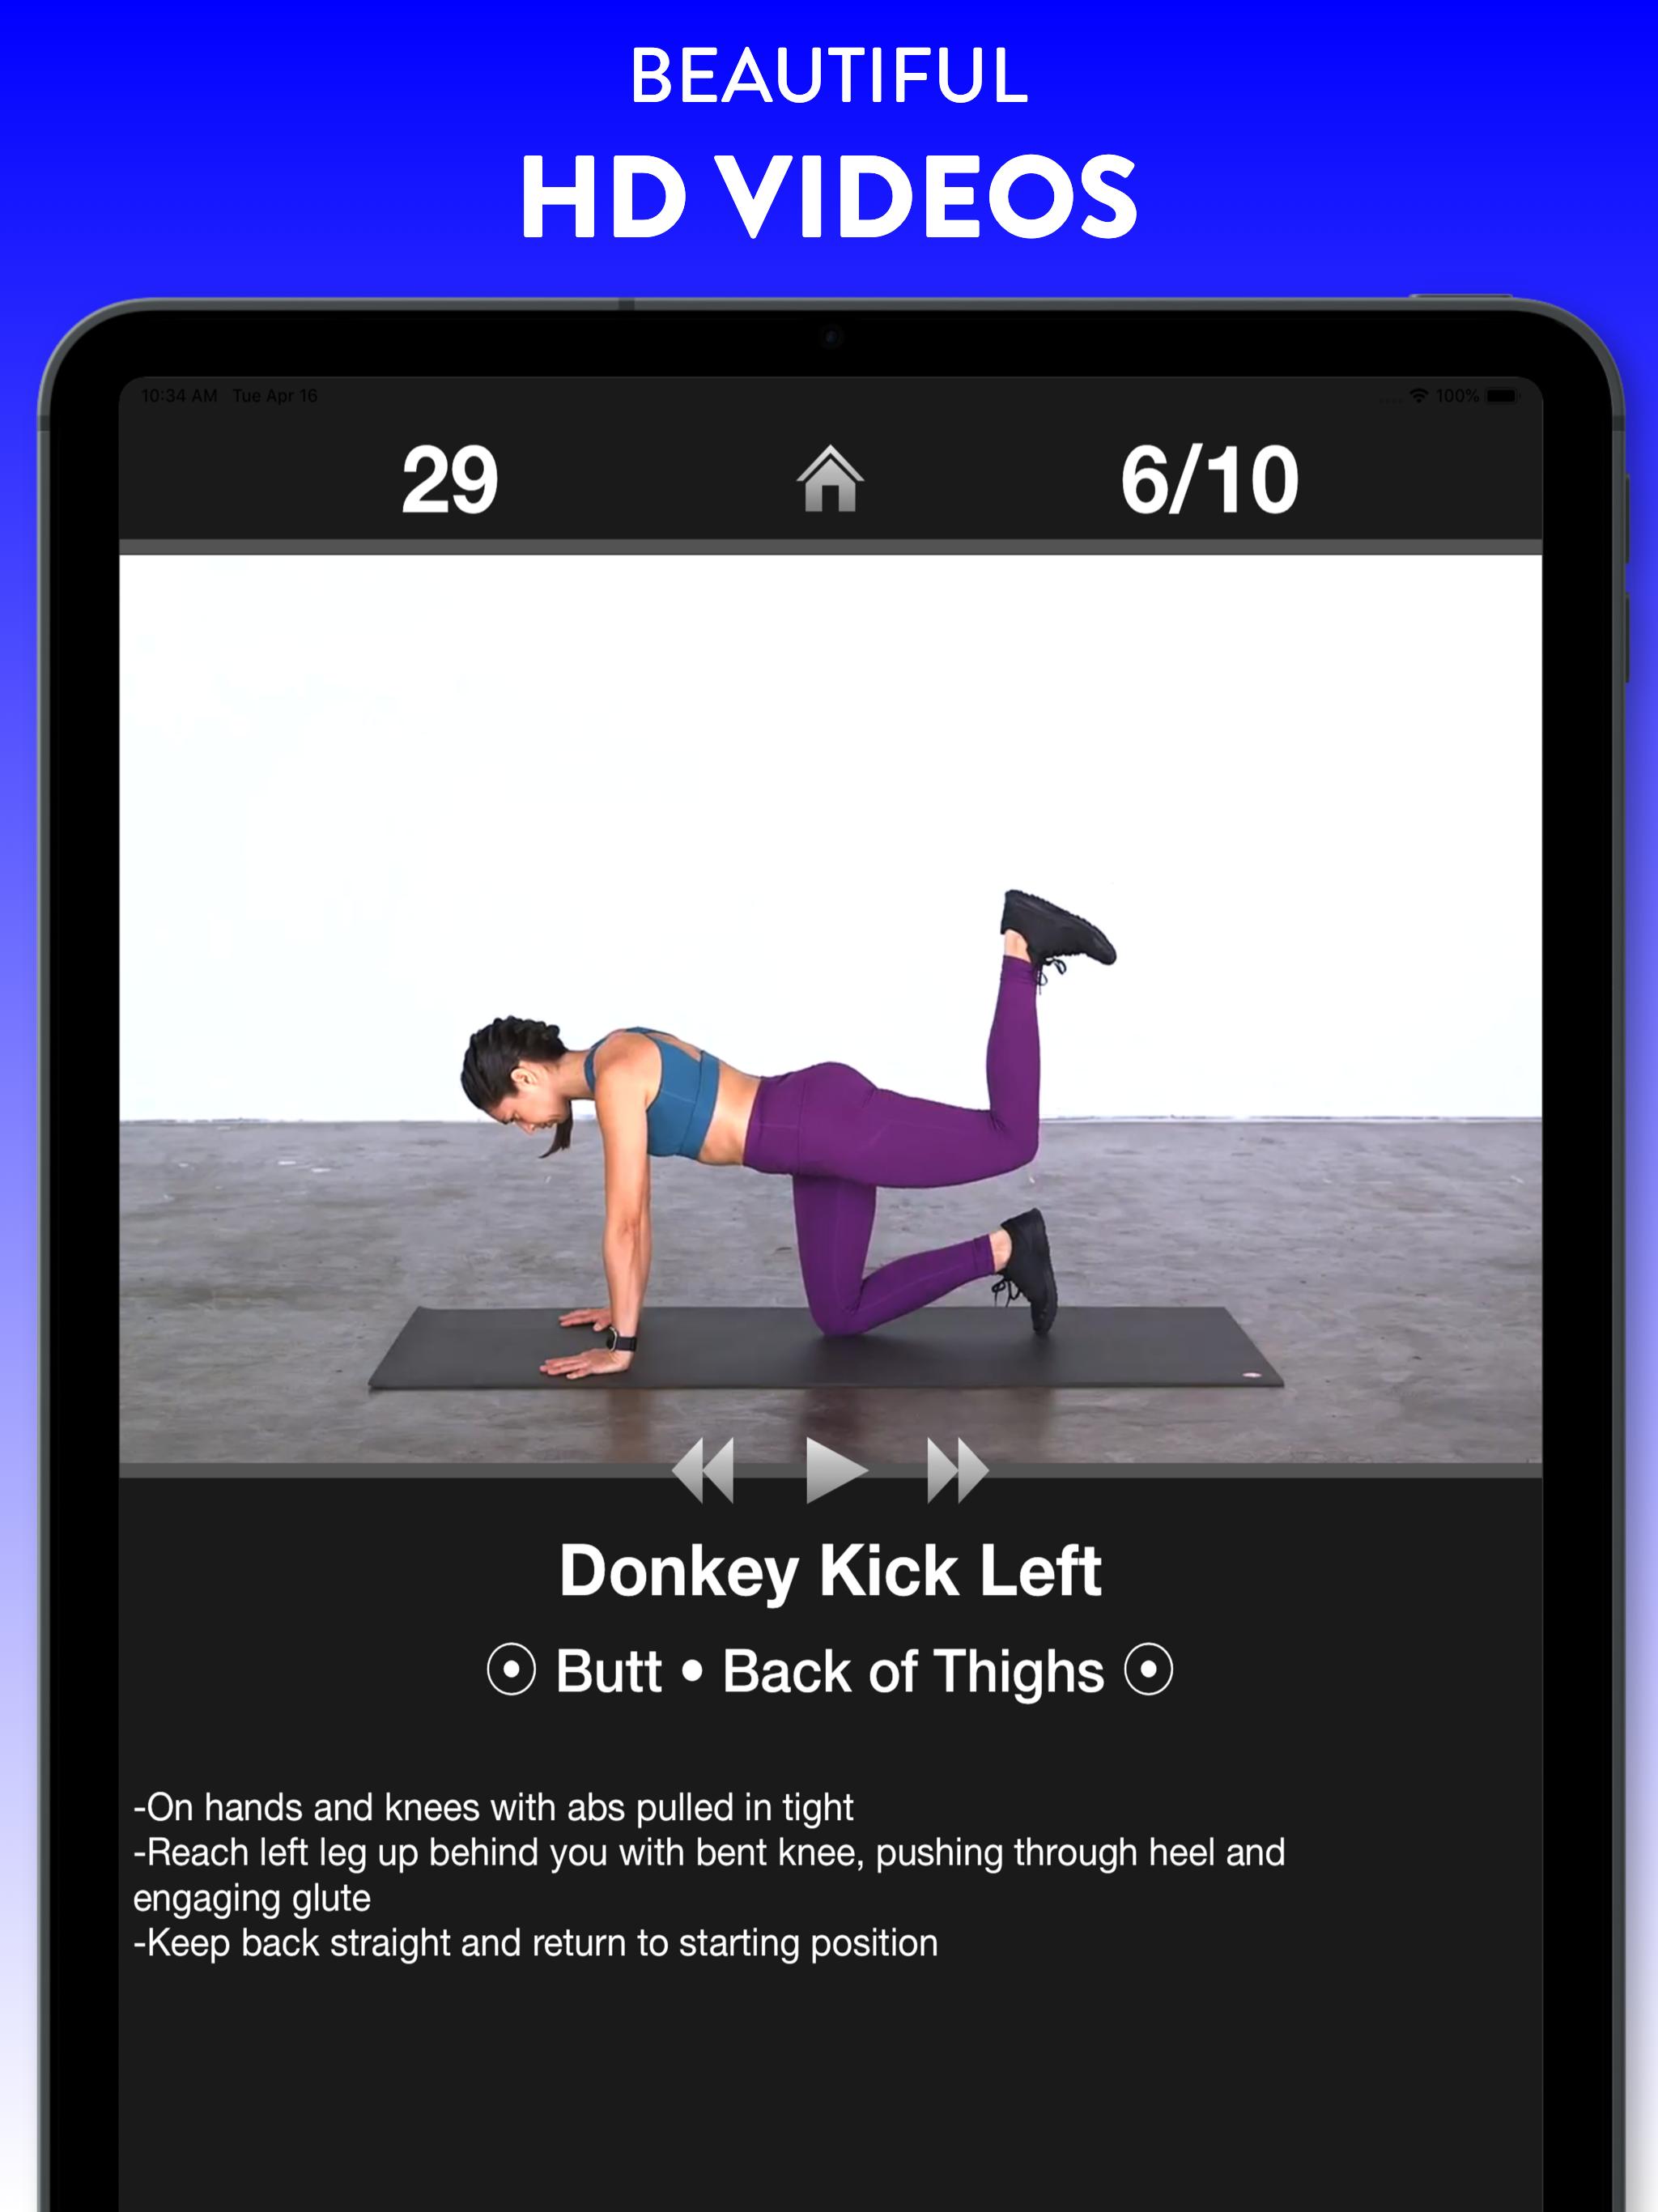 Daily Workouts - Exercise Fitness Workout Trainer 6.12 Screenshot 9